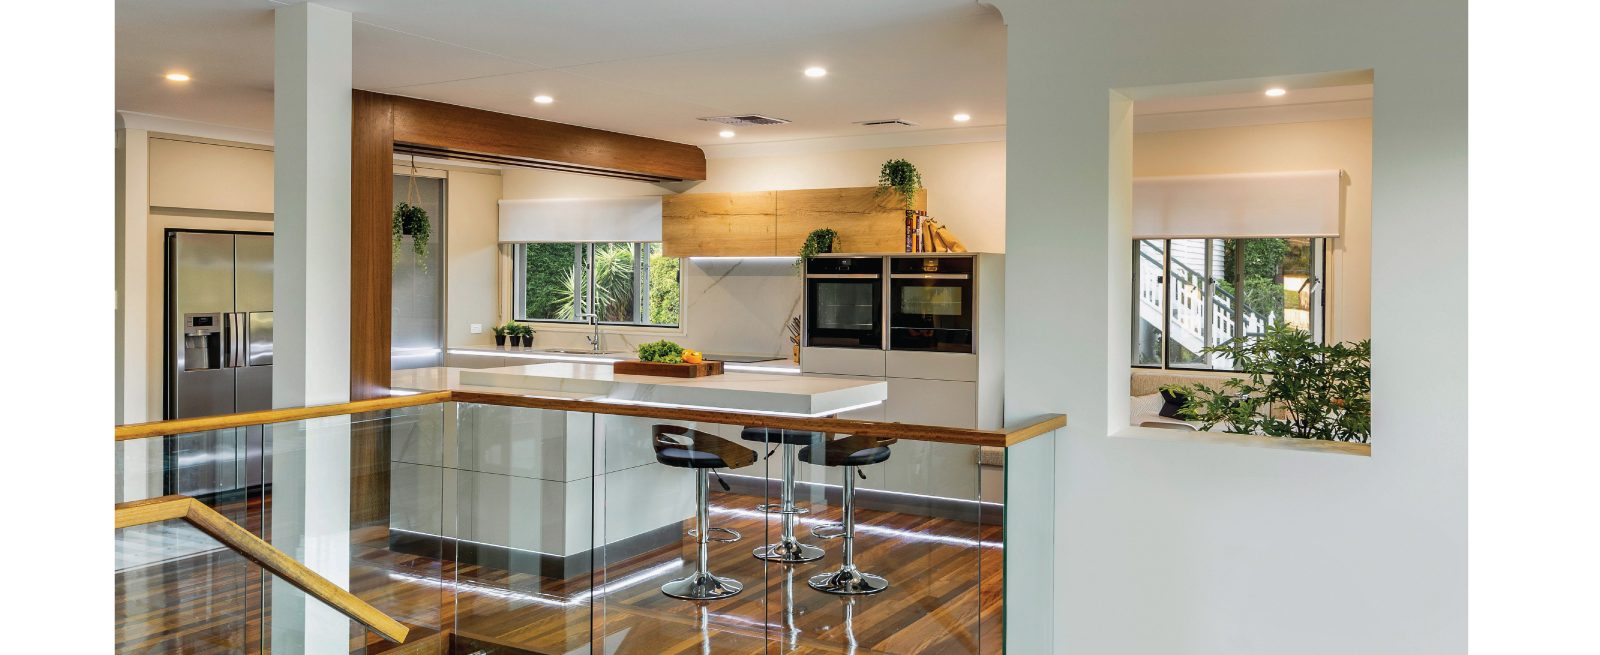 Kitchen Design by Kim Duffin of Sublime Architectural Interiors